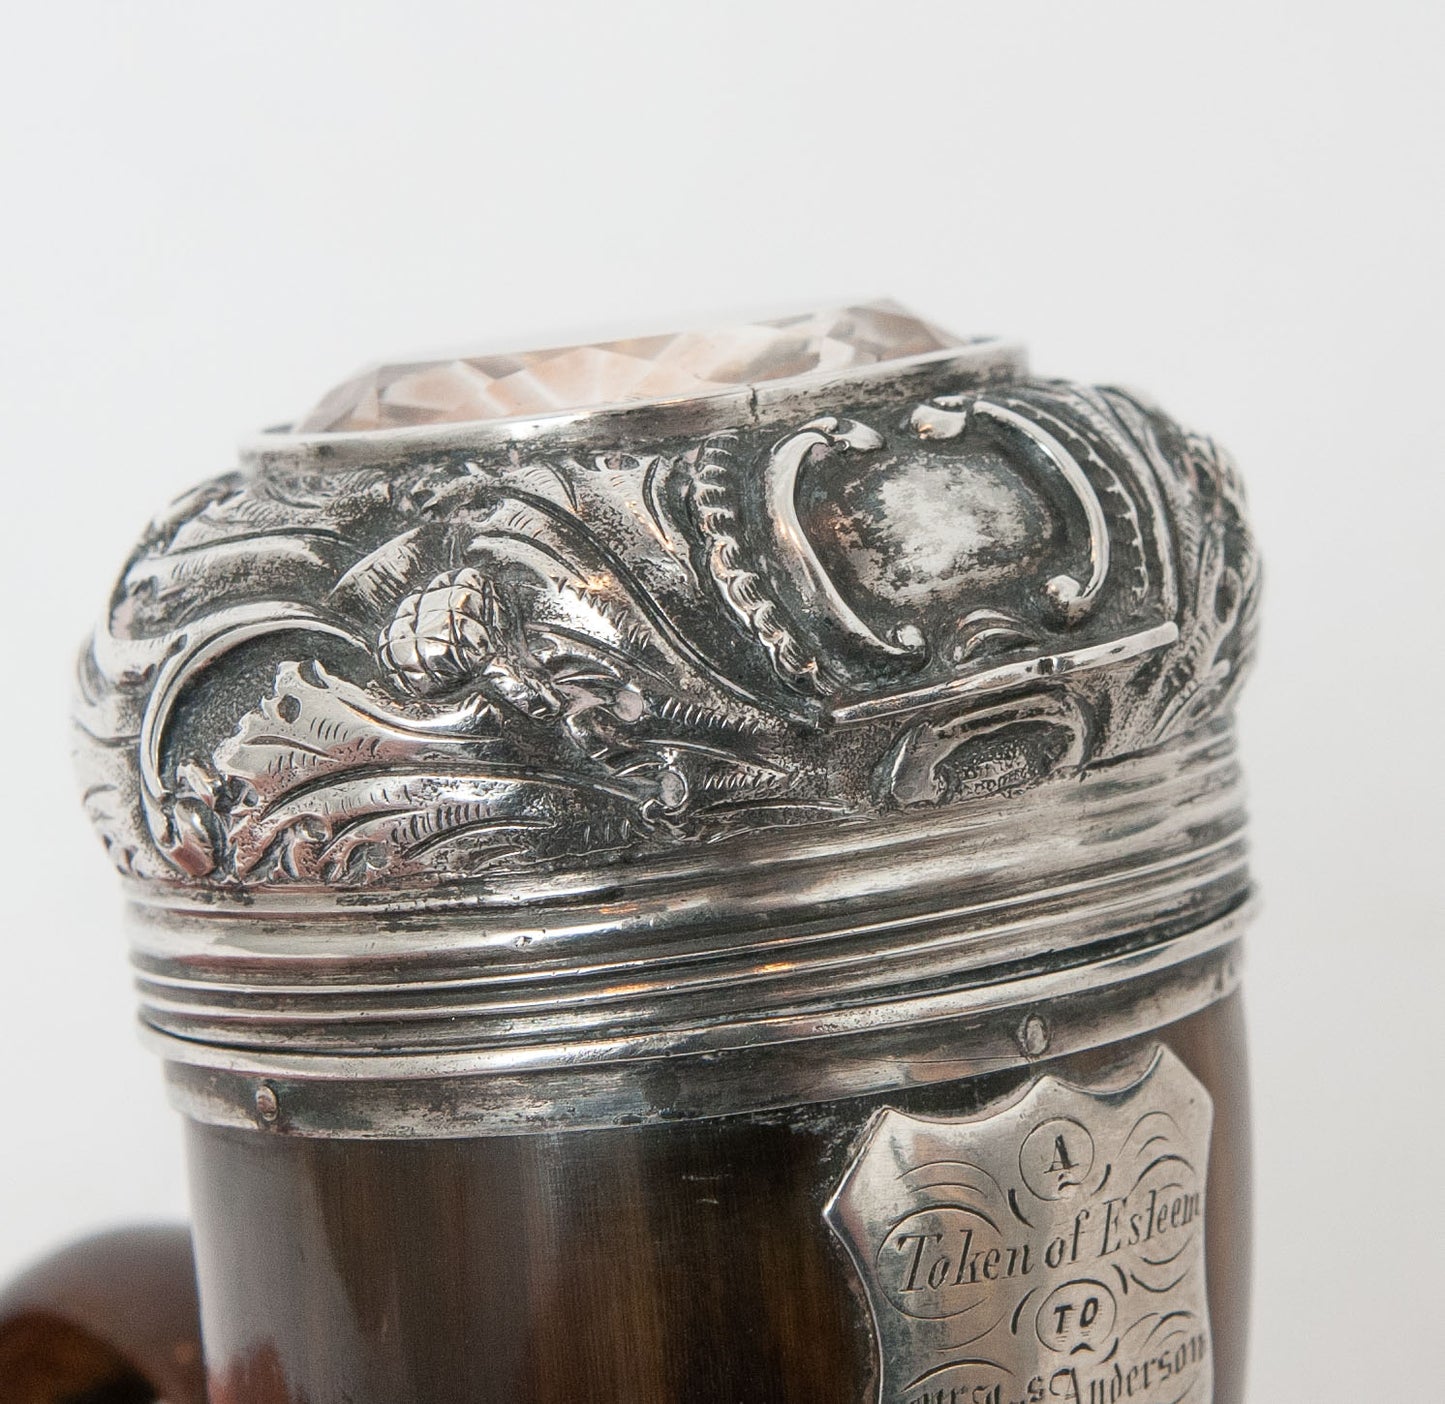 Antique Scottish Rams Horn Snuff Mull Box with Citrine & Silver Lid & Queen Anne Shilling (Code 1534)